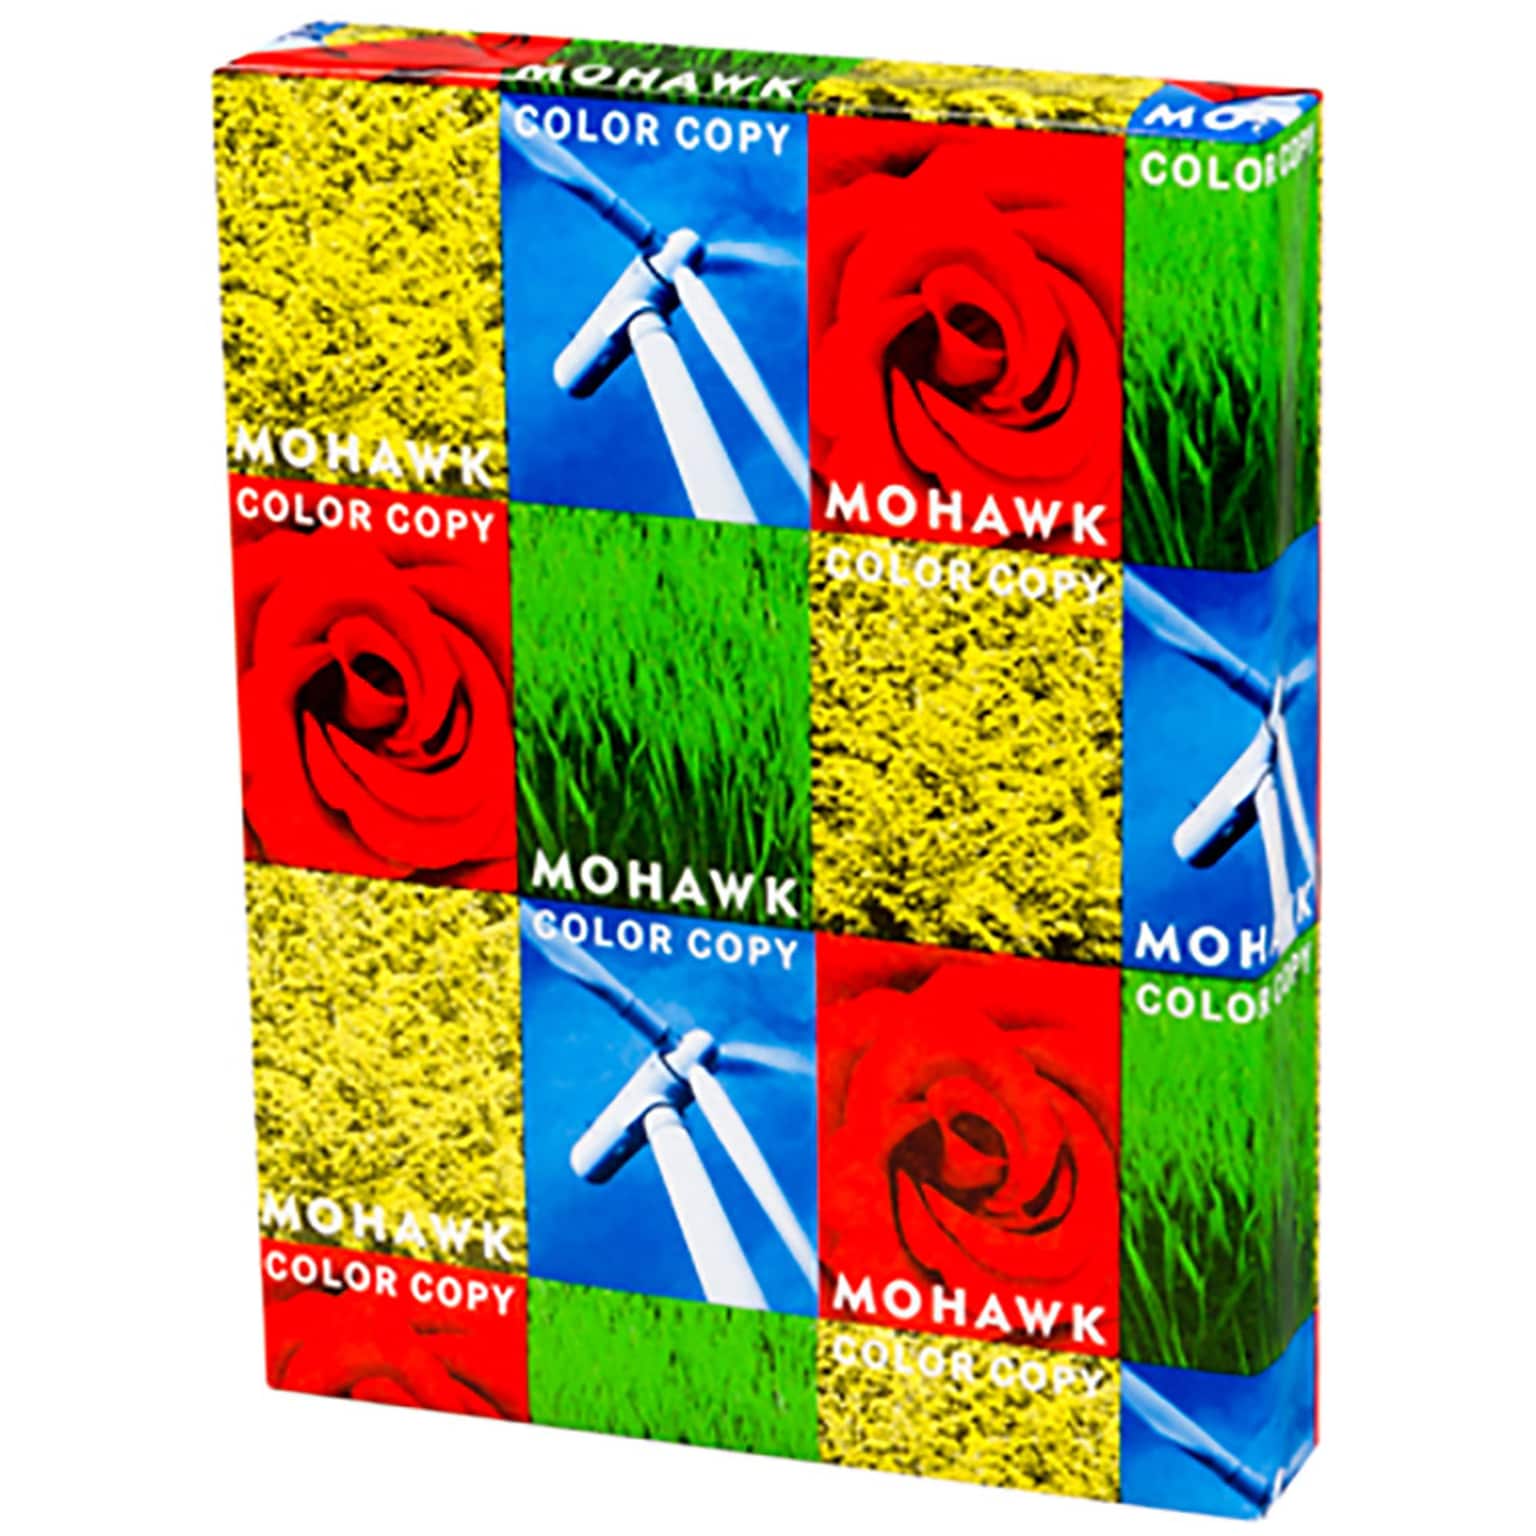 Mohawk® Color Copy 98 12 x 18 Smooth Imaging Paper, 32 lbs., 98 Brightness, 500 Sheets/Ream (12-210)